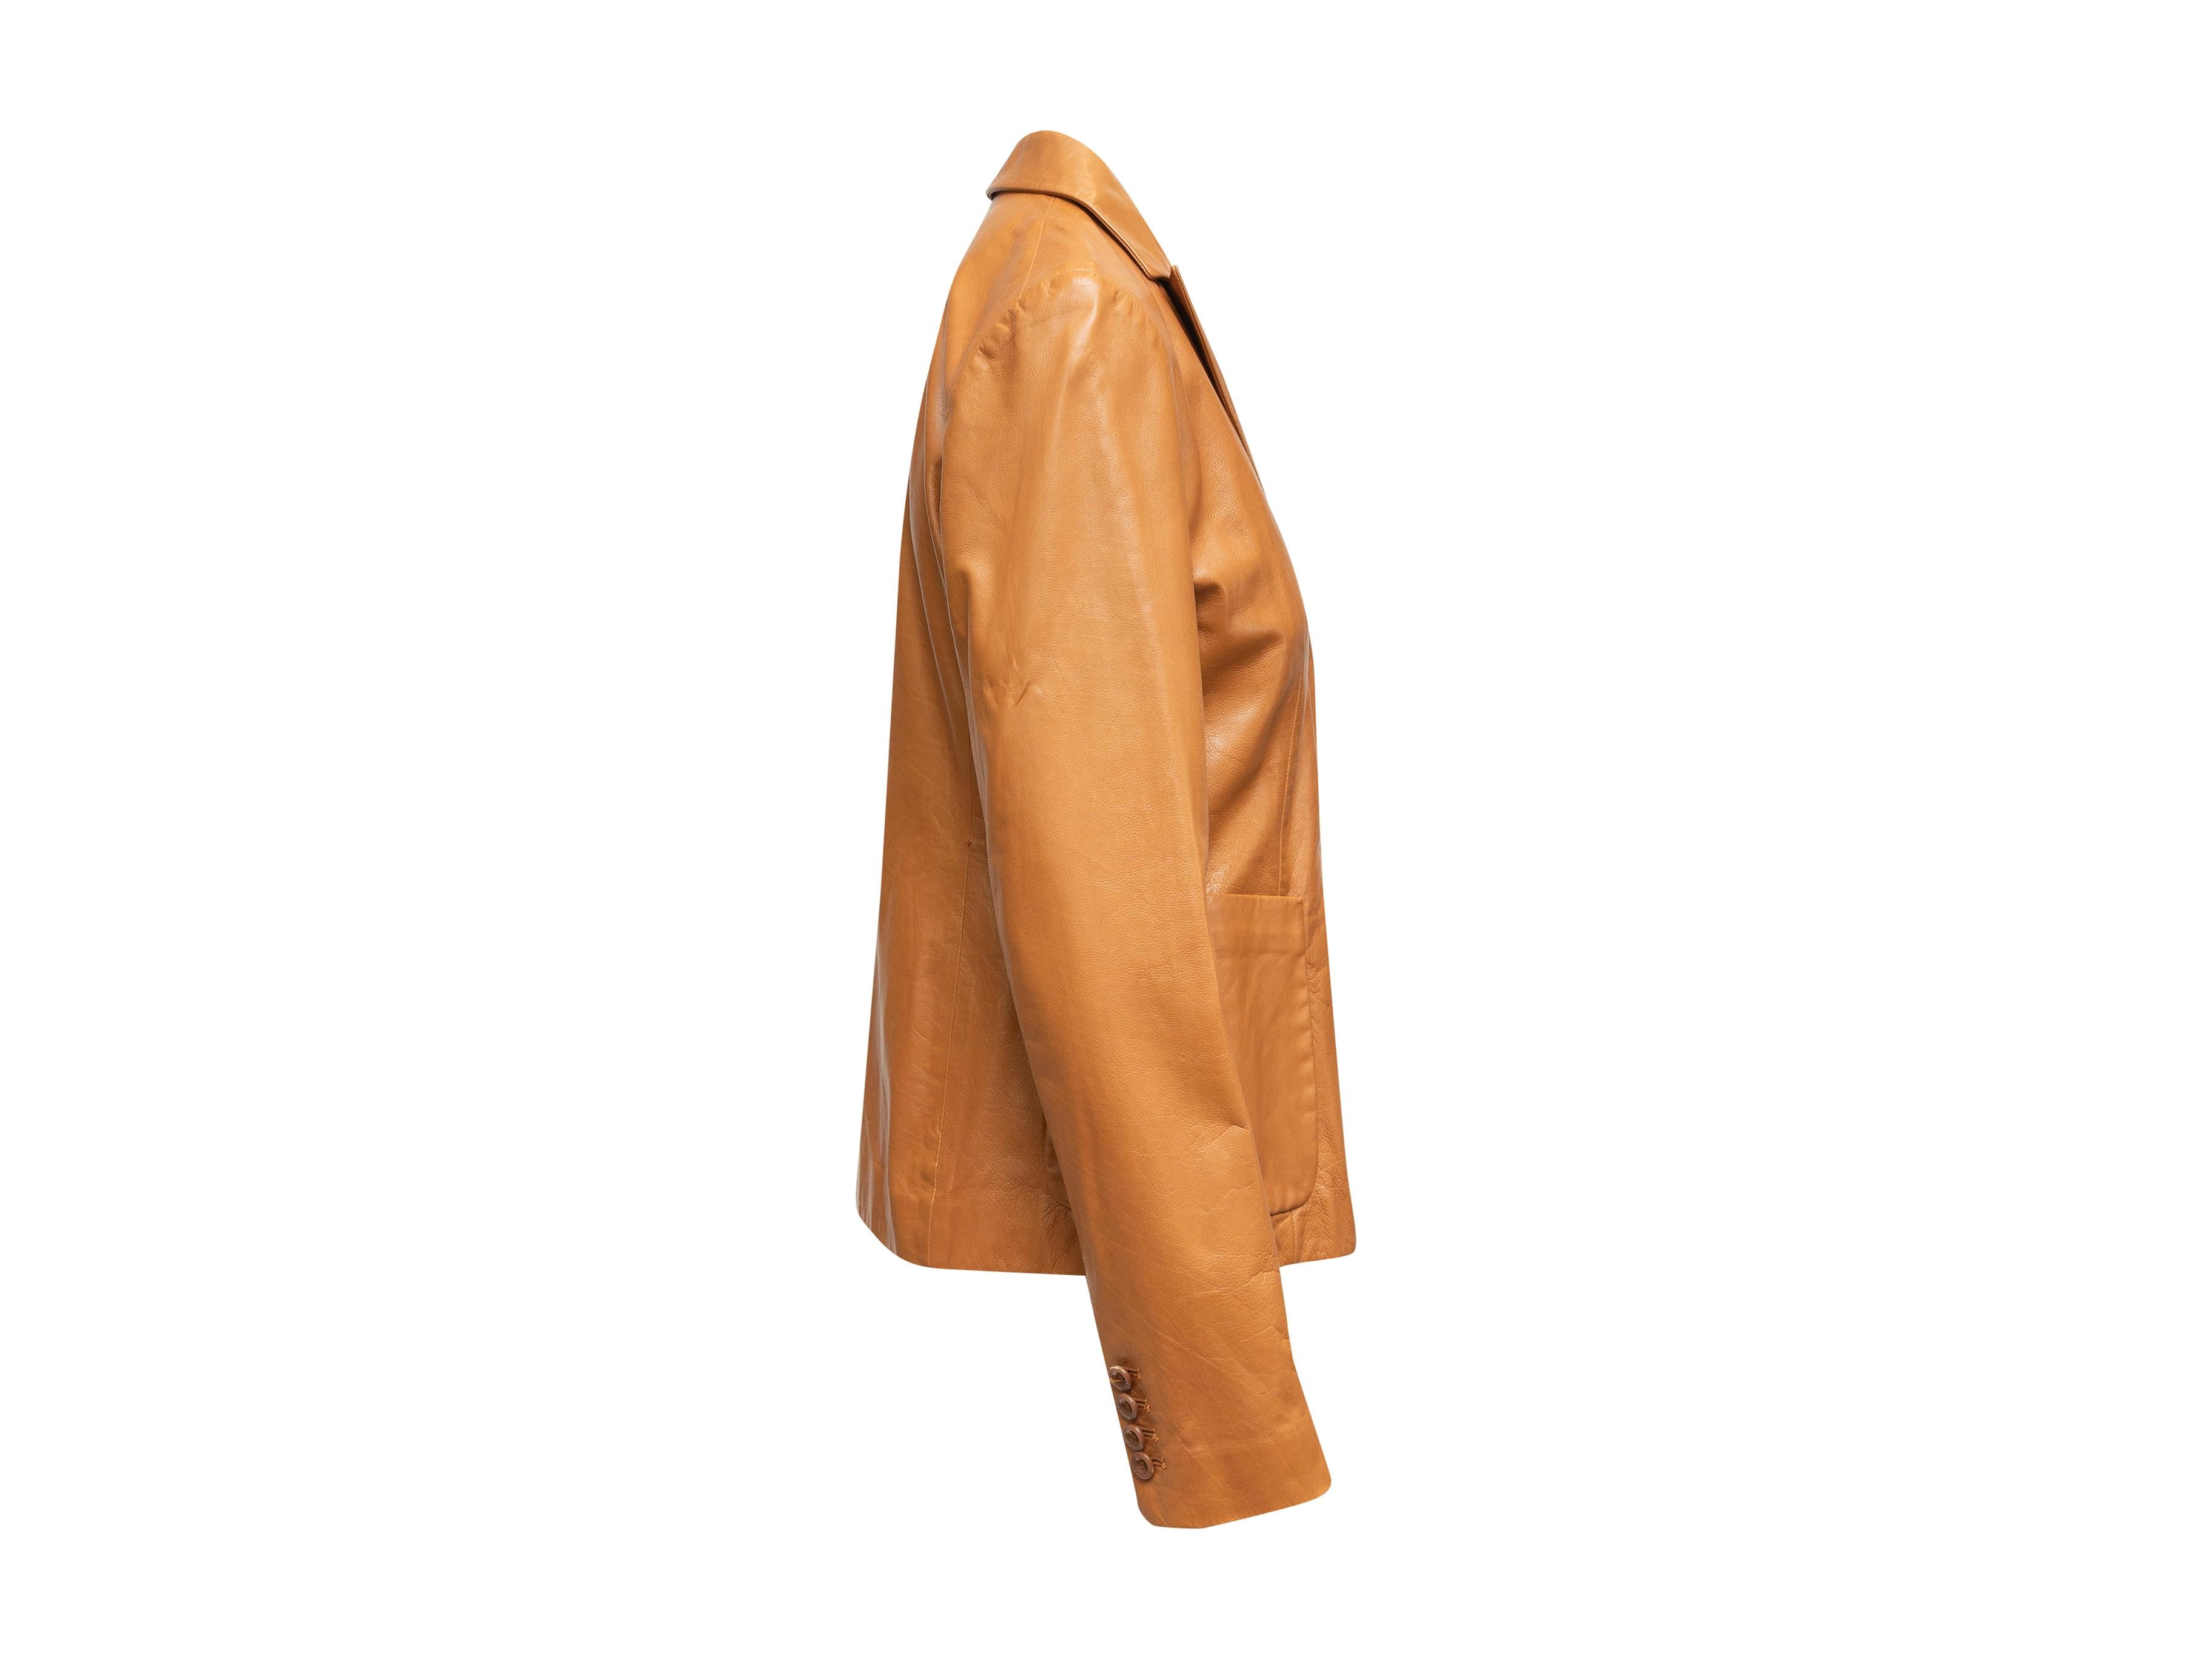 Product details: Tan leather double-breasted blazer by Reed Krakoff. Peaked lapels. Welt pocket at bust. Dual patch pockets at hips. Concealed closures at front. 36